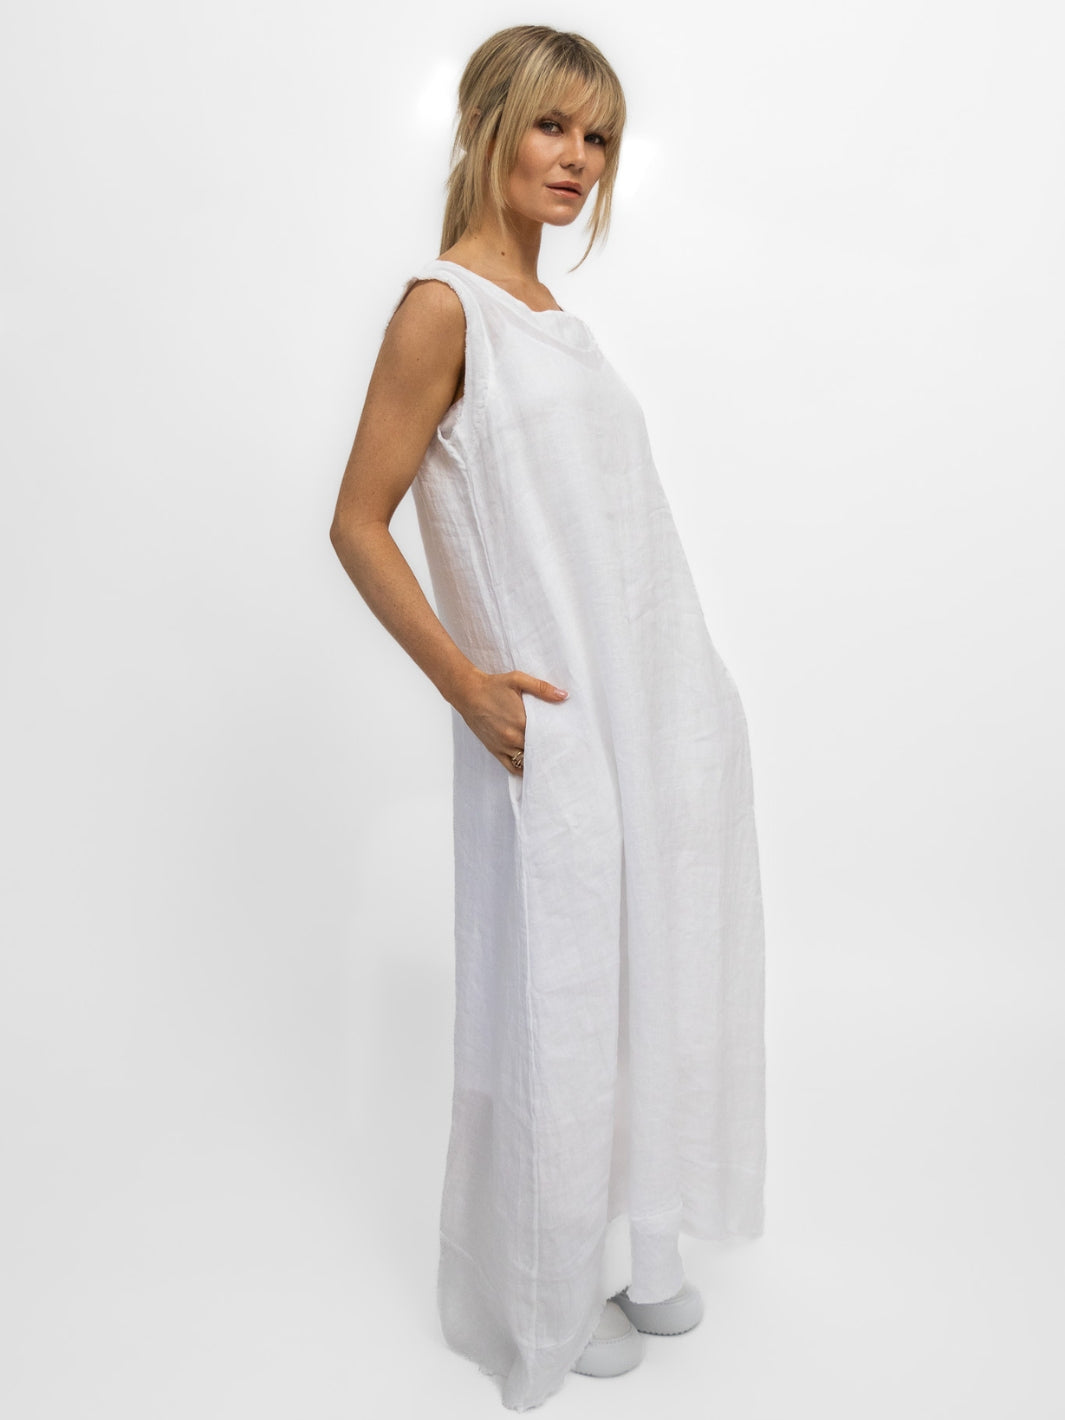 Diffusion by Kate Dress One Size Linen Maxi Dress in White